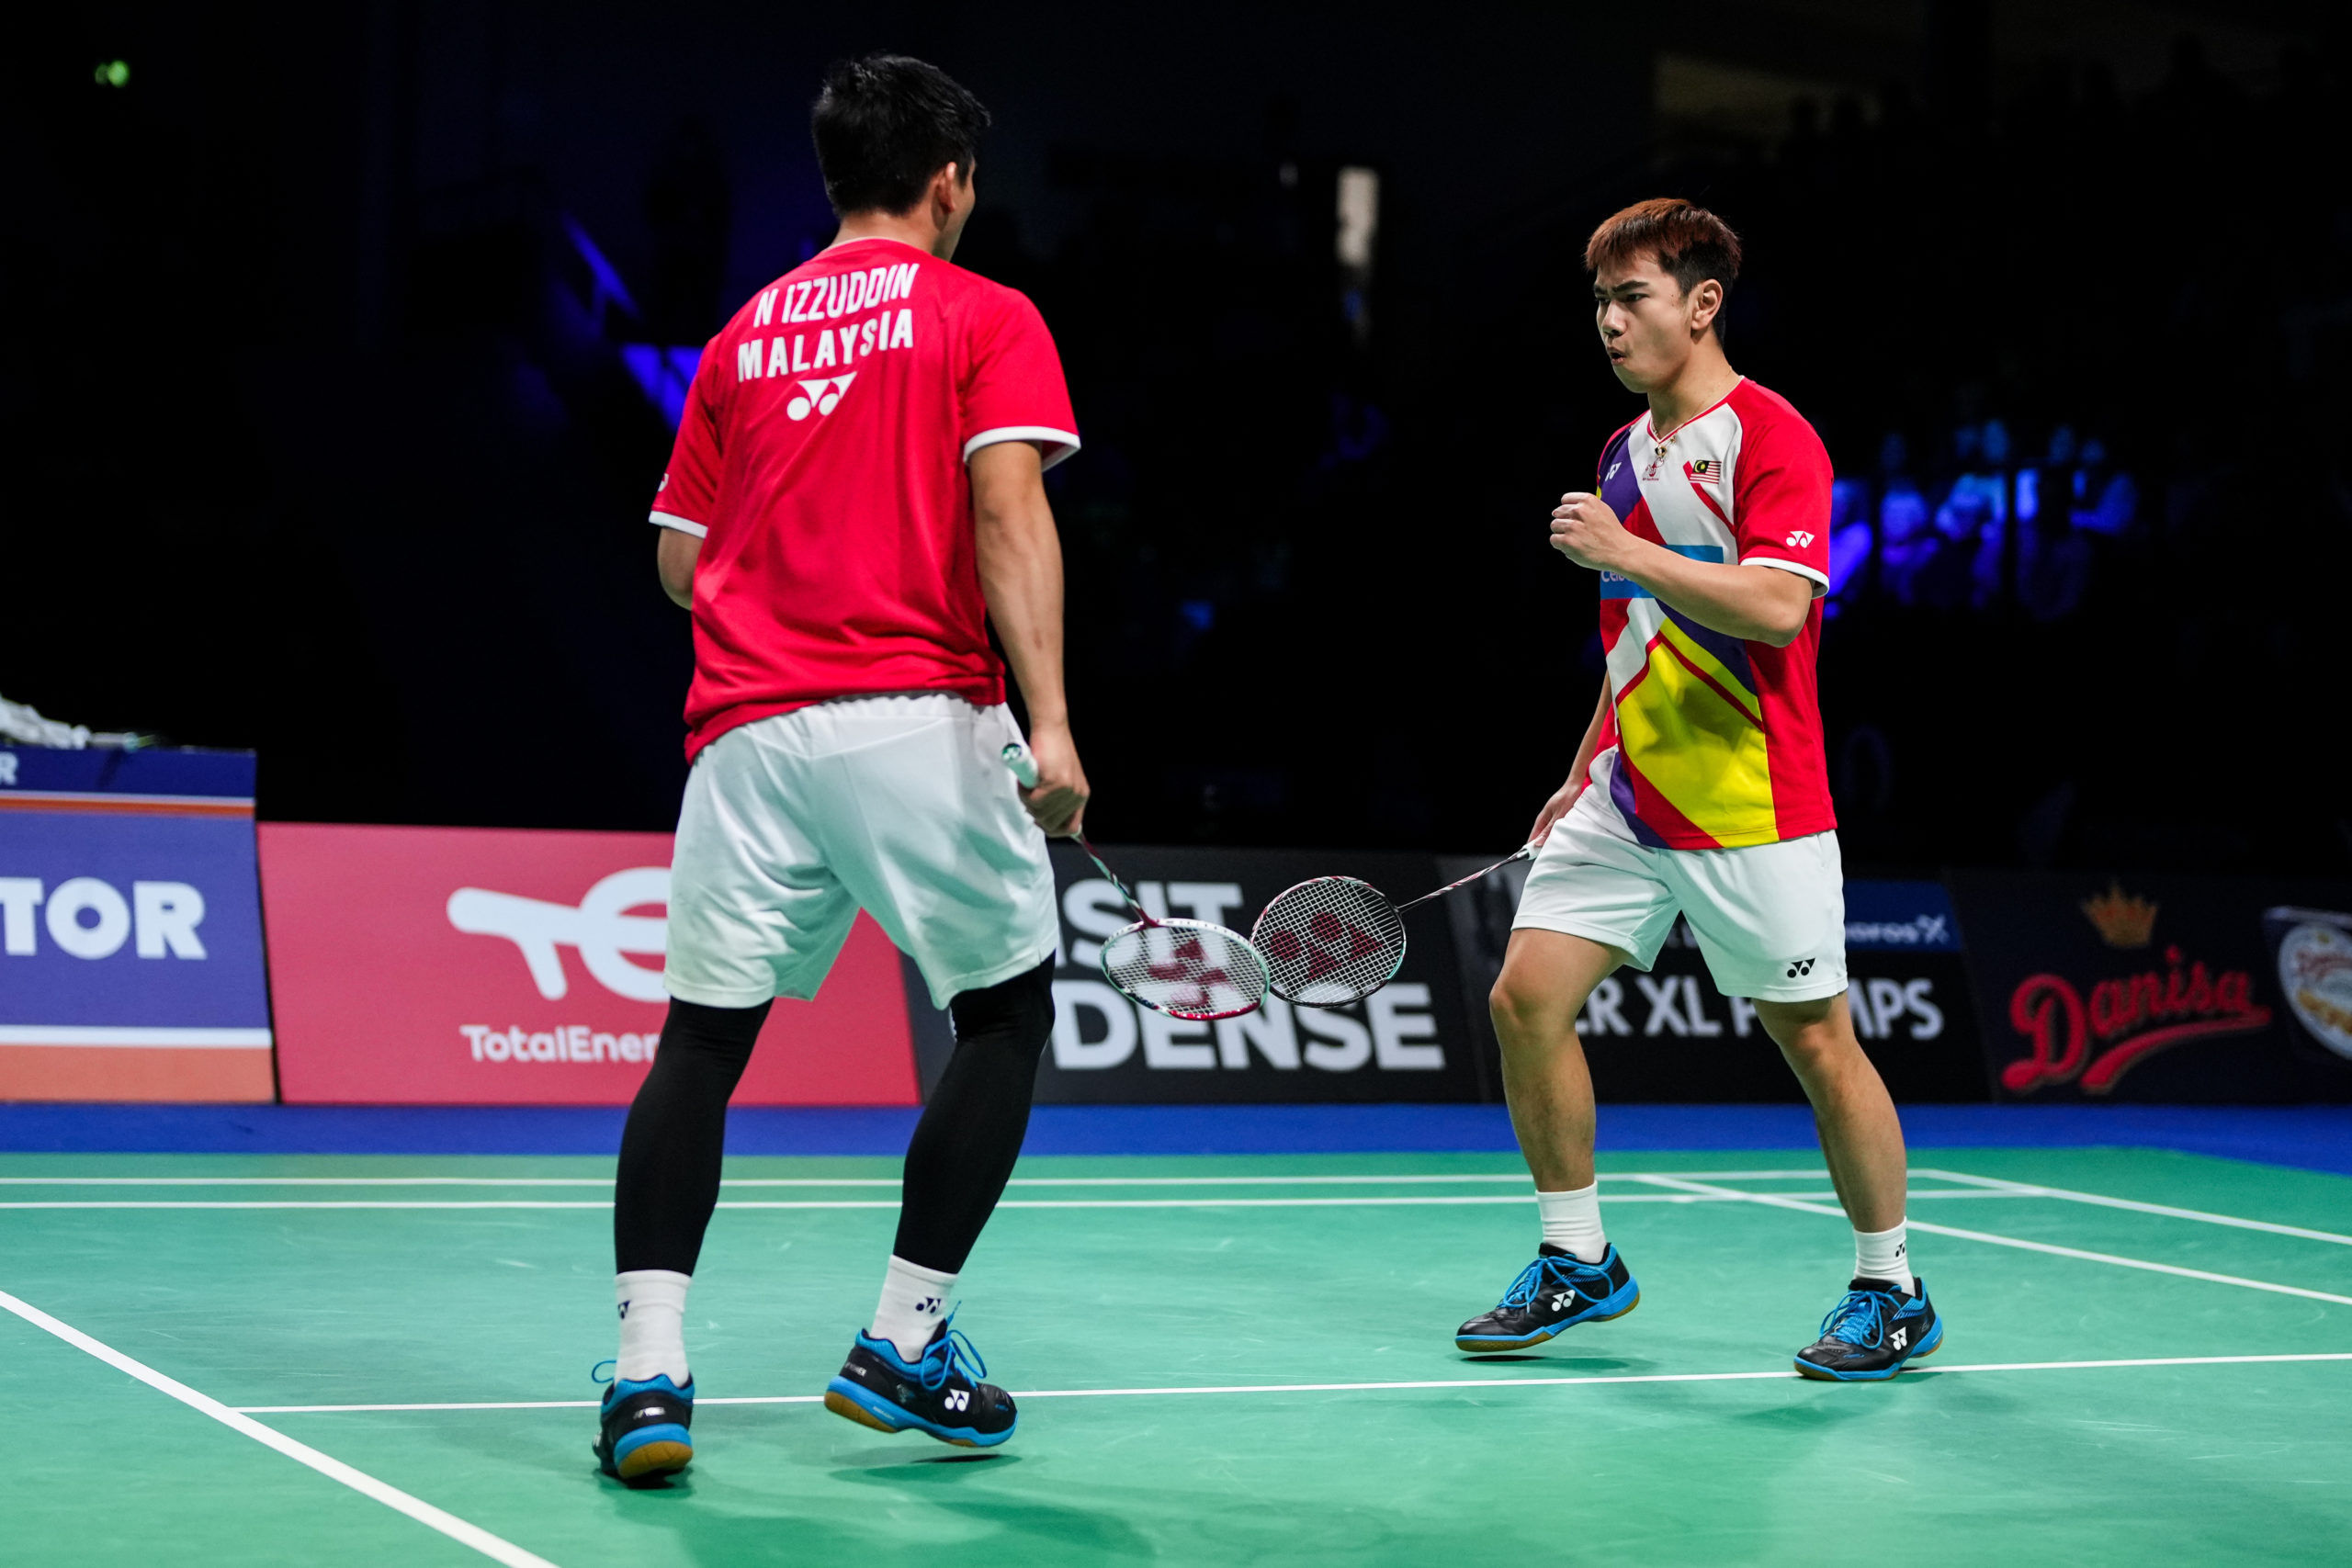 2022 All England Open Who will Malaysian badminton players be facing?